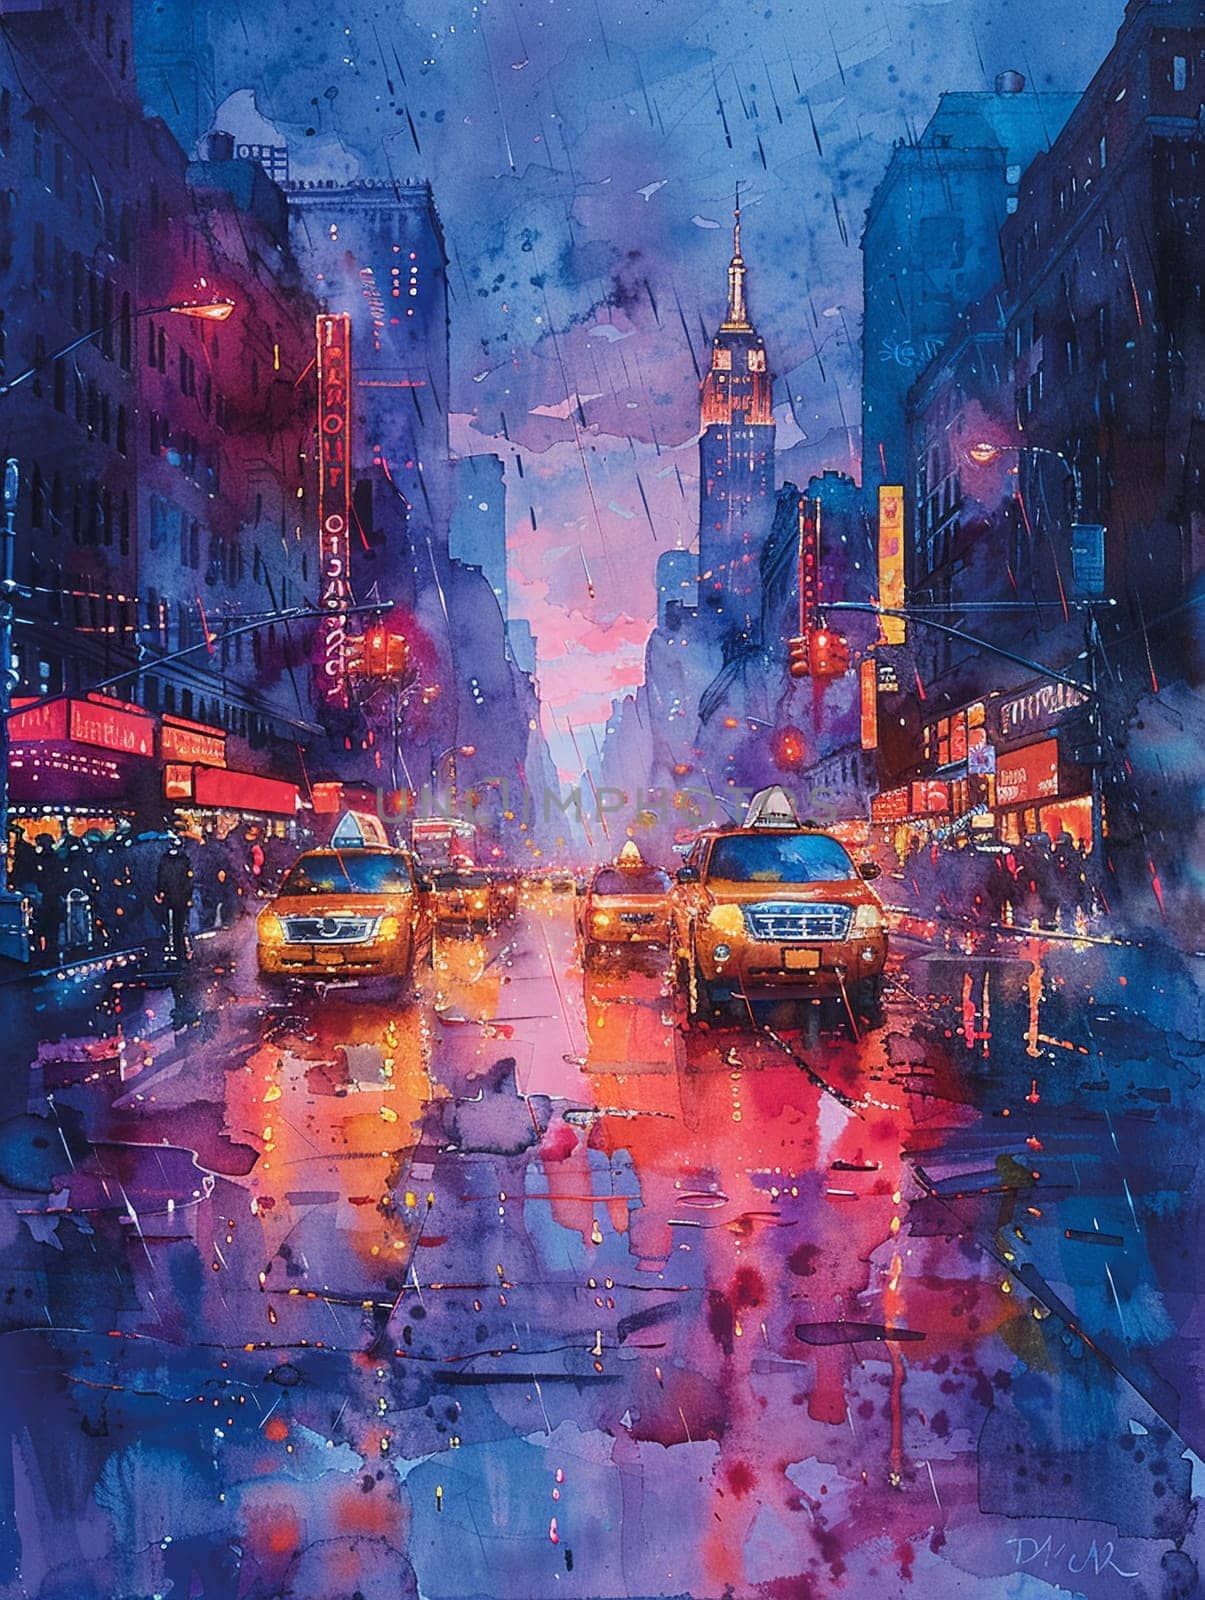 Bustling avenue in rain painted with vibrant, flowing watercolors, emphasizing movement and life.